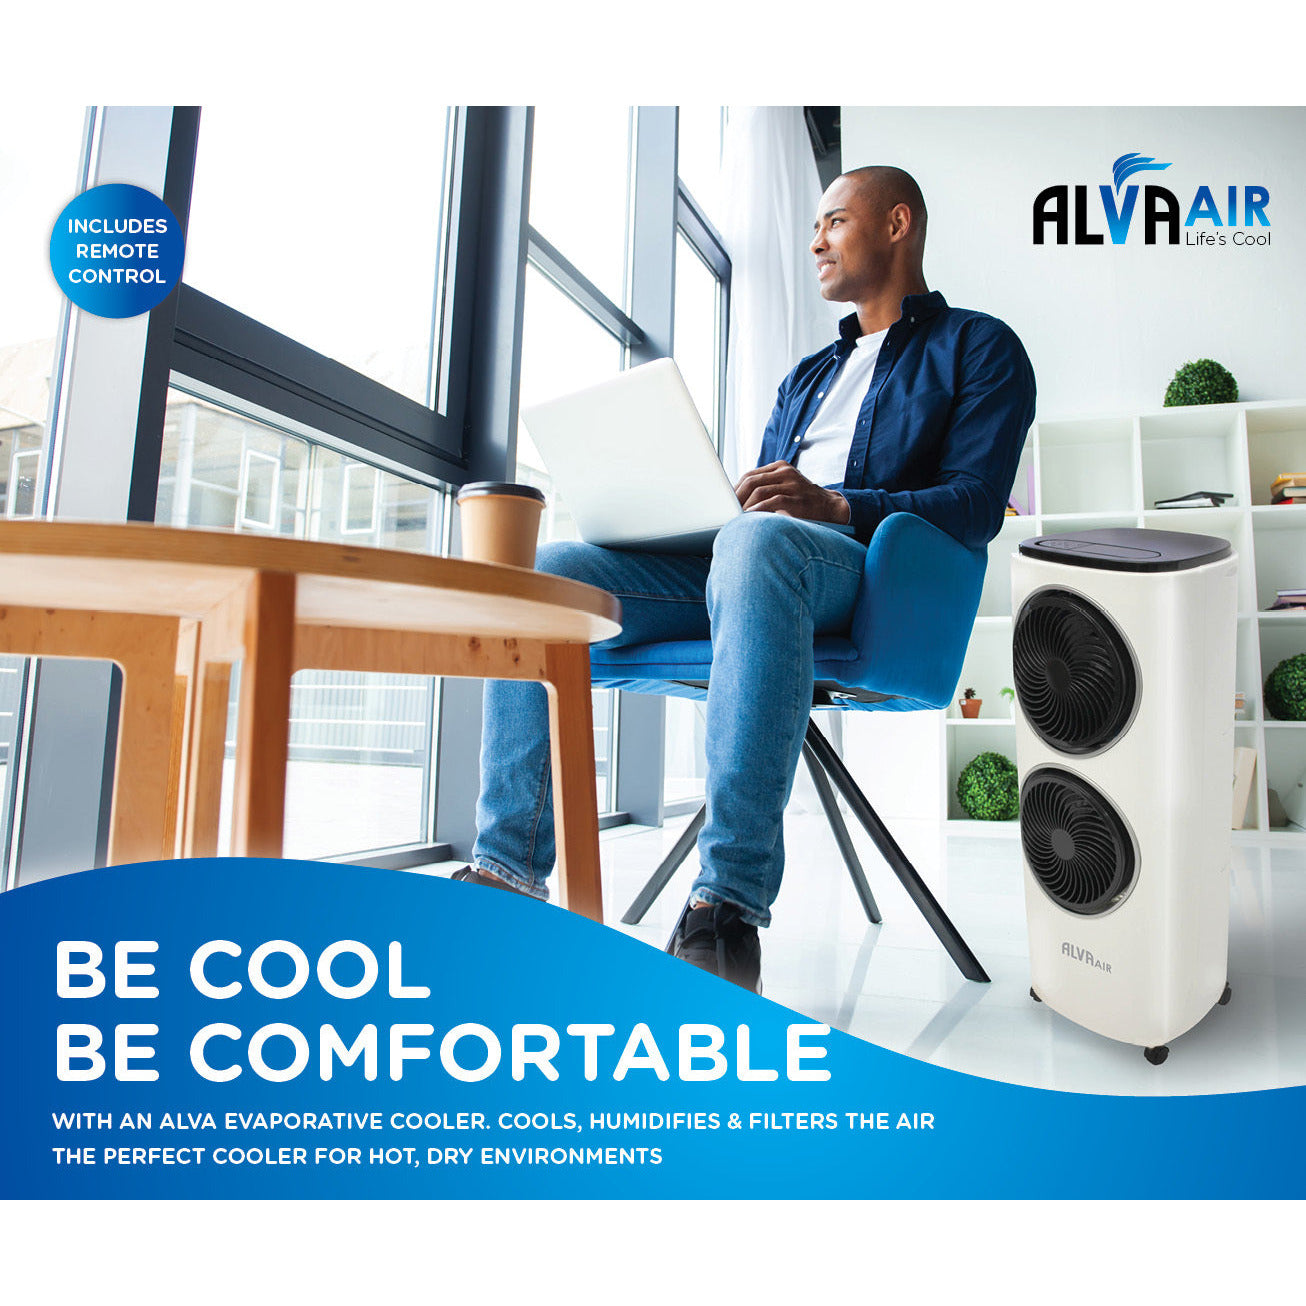 TWIN FAN EVAPORATIVE AIR COOLER WITH REMOTE CONTROL